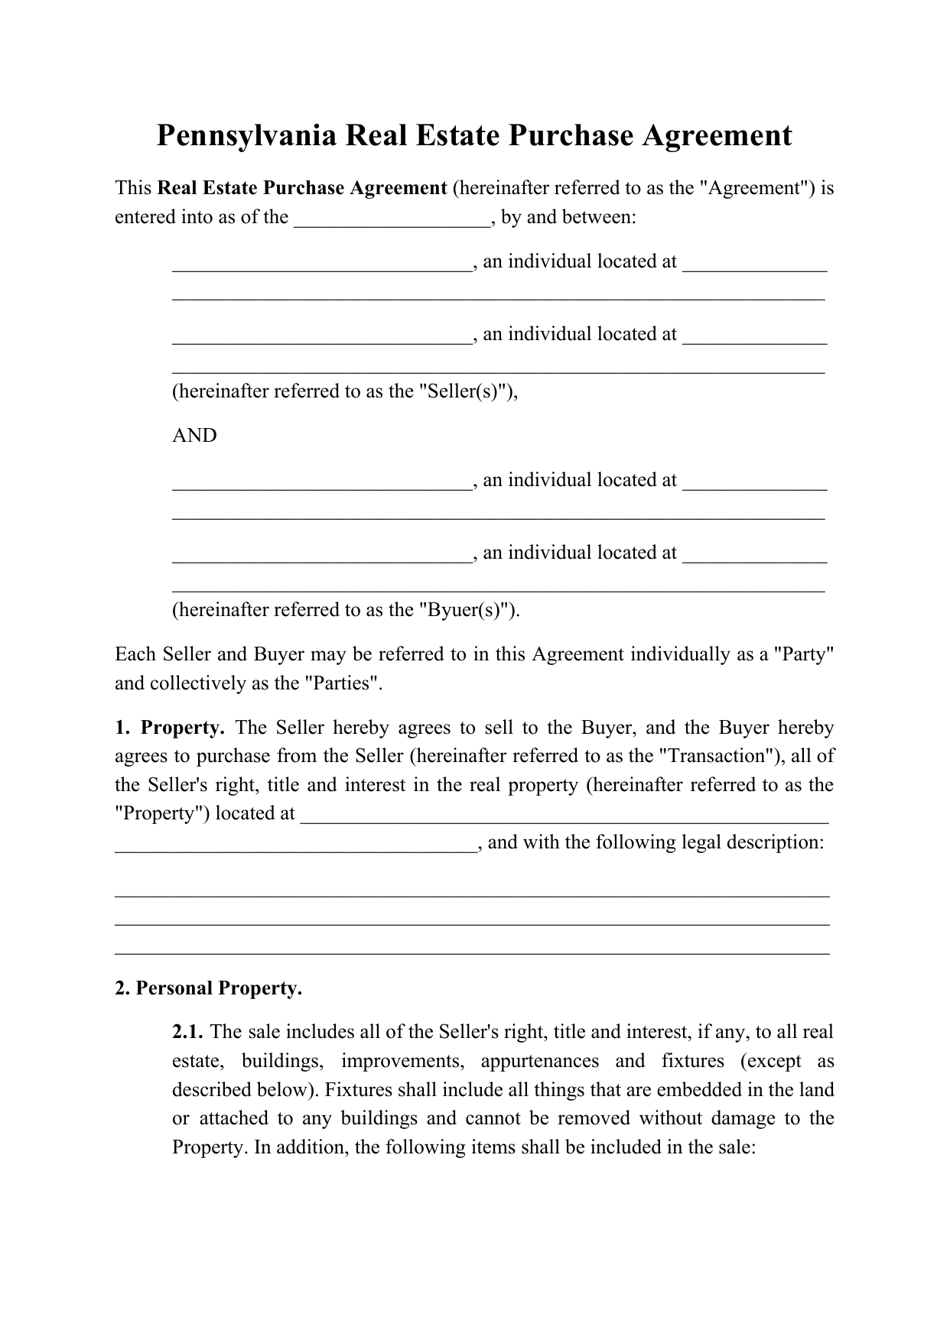 Real Estate Purchase Agreement Template - Pennsylvania, Page 1